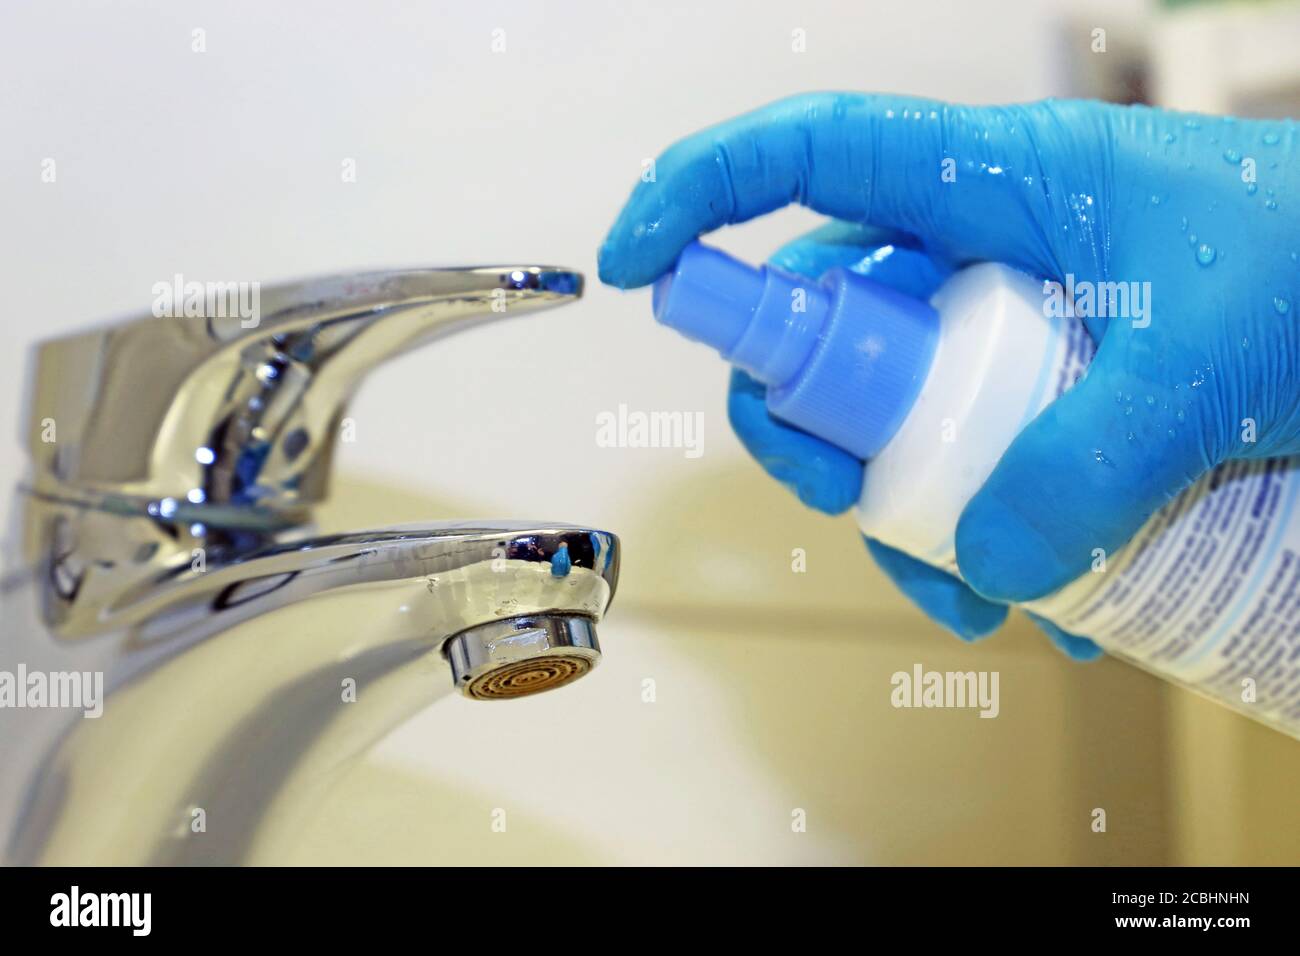 Cleaning and disinfection of a wash basin Stock Photo